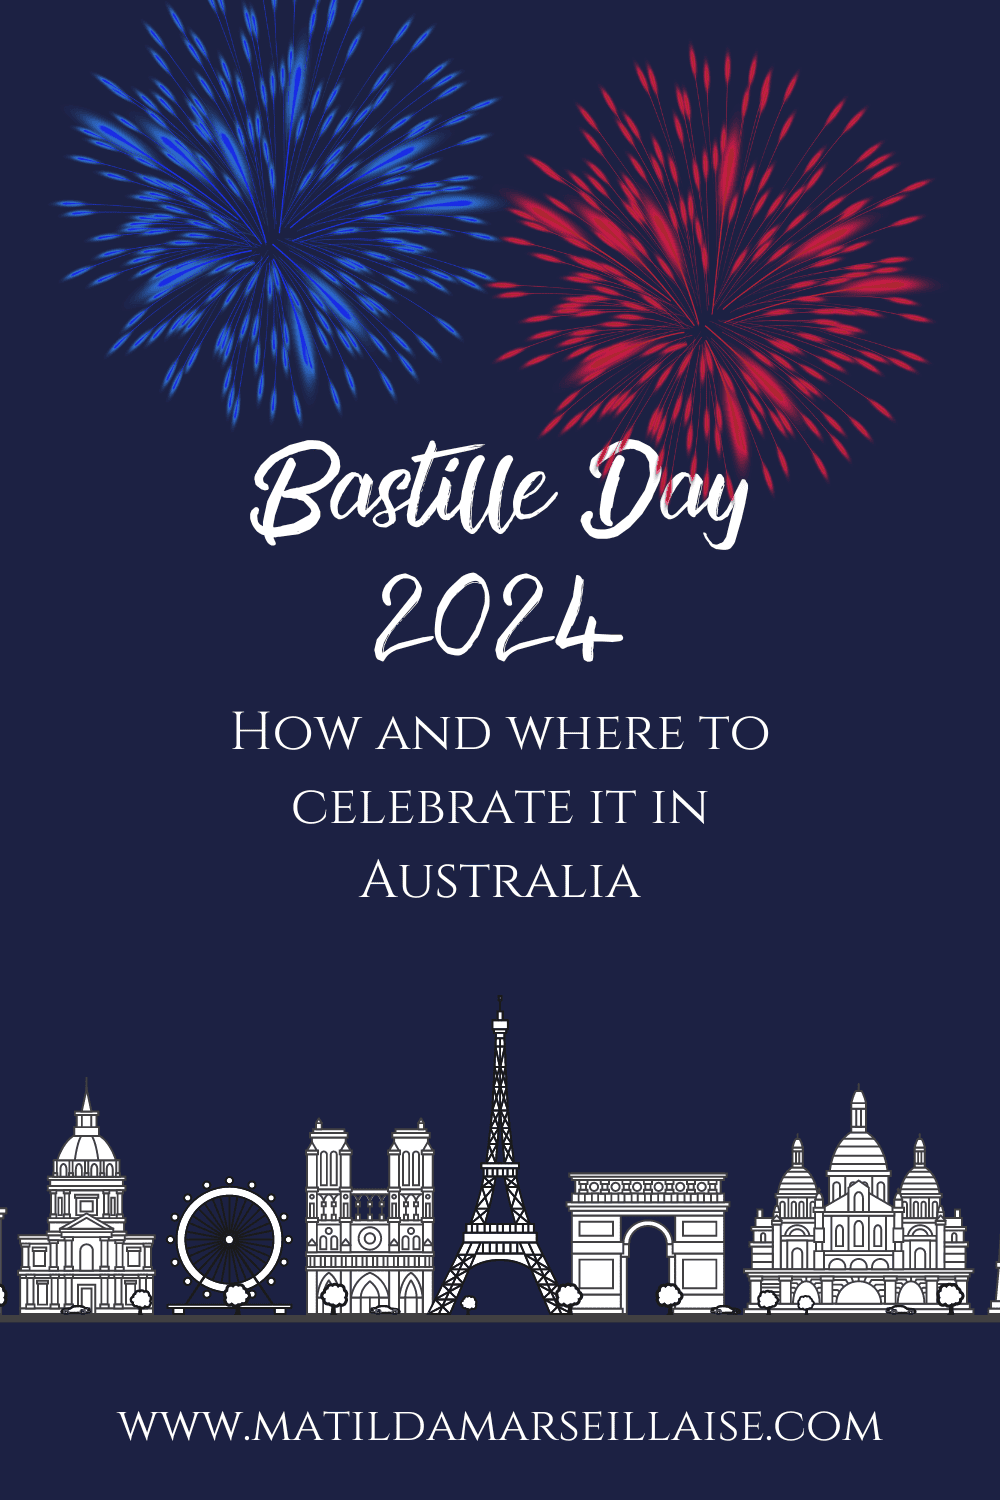 How and where to celebrate Bastille Day 2024 in Australia